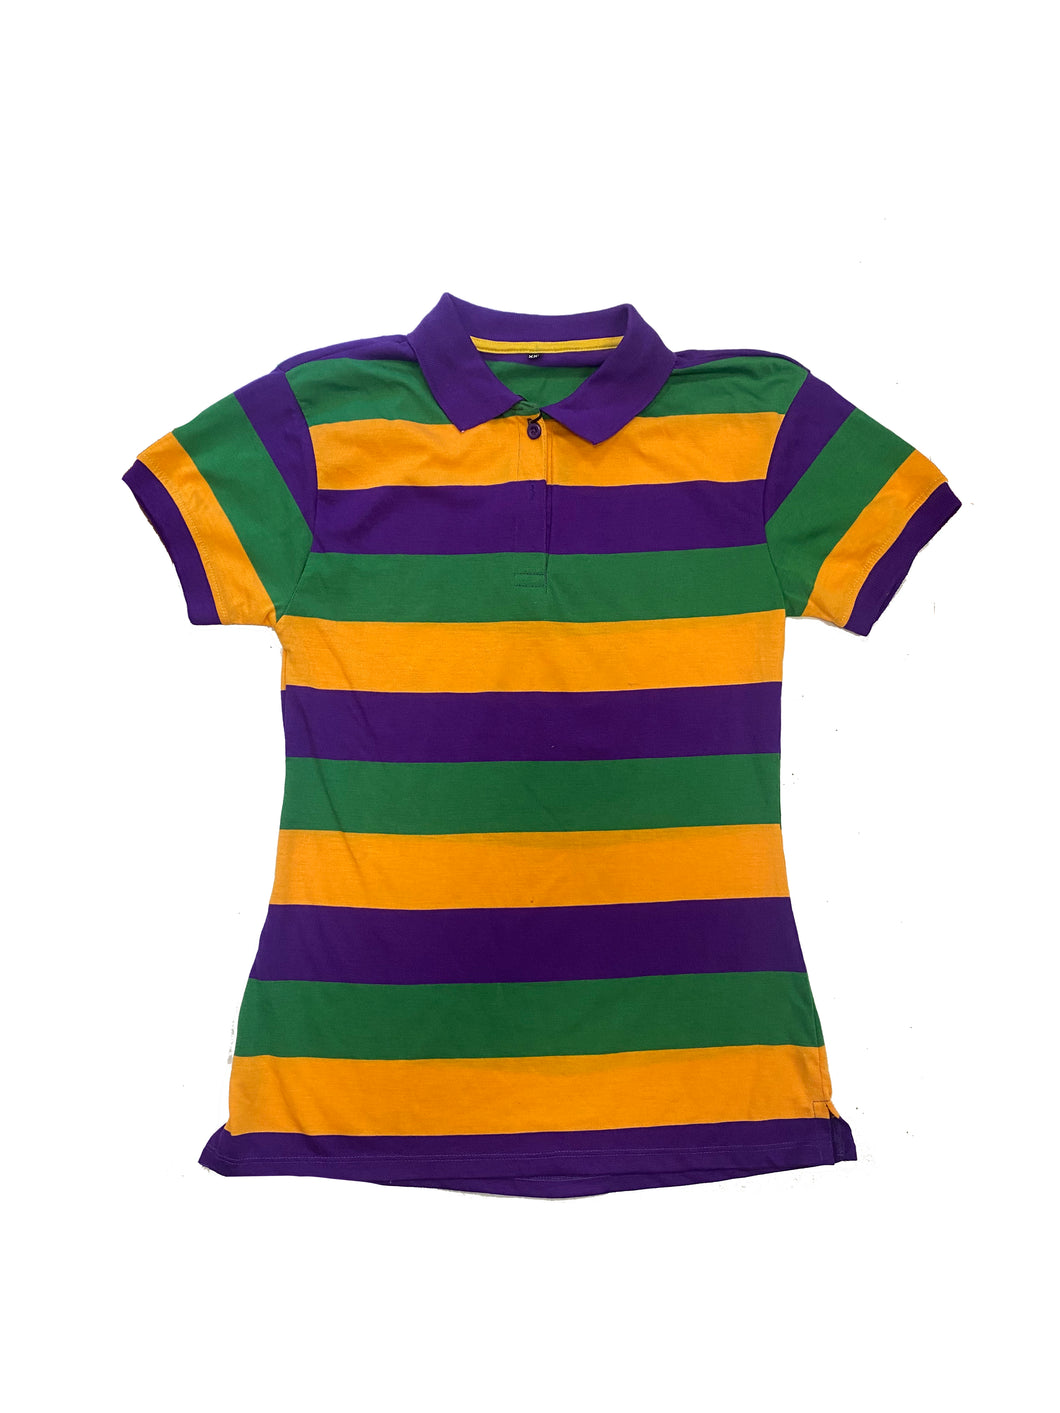 Adult Fitted Short Sleeve Rugby with Purple Collar